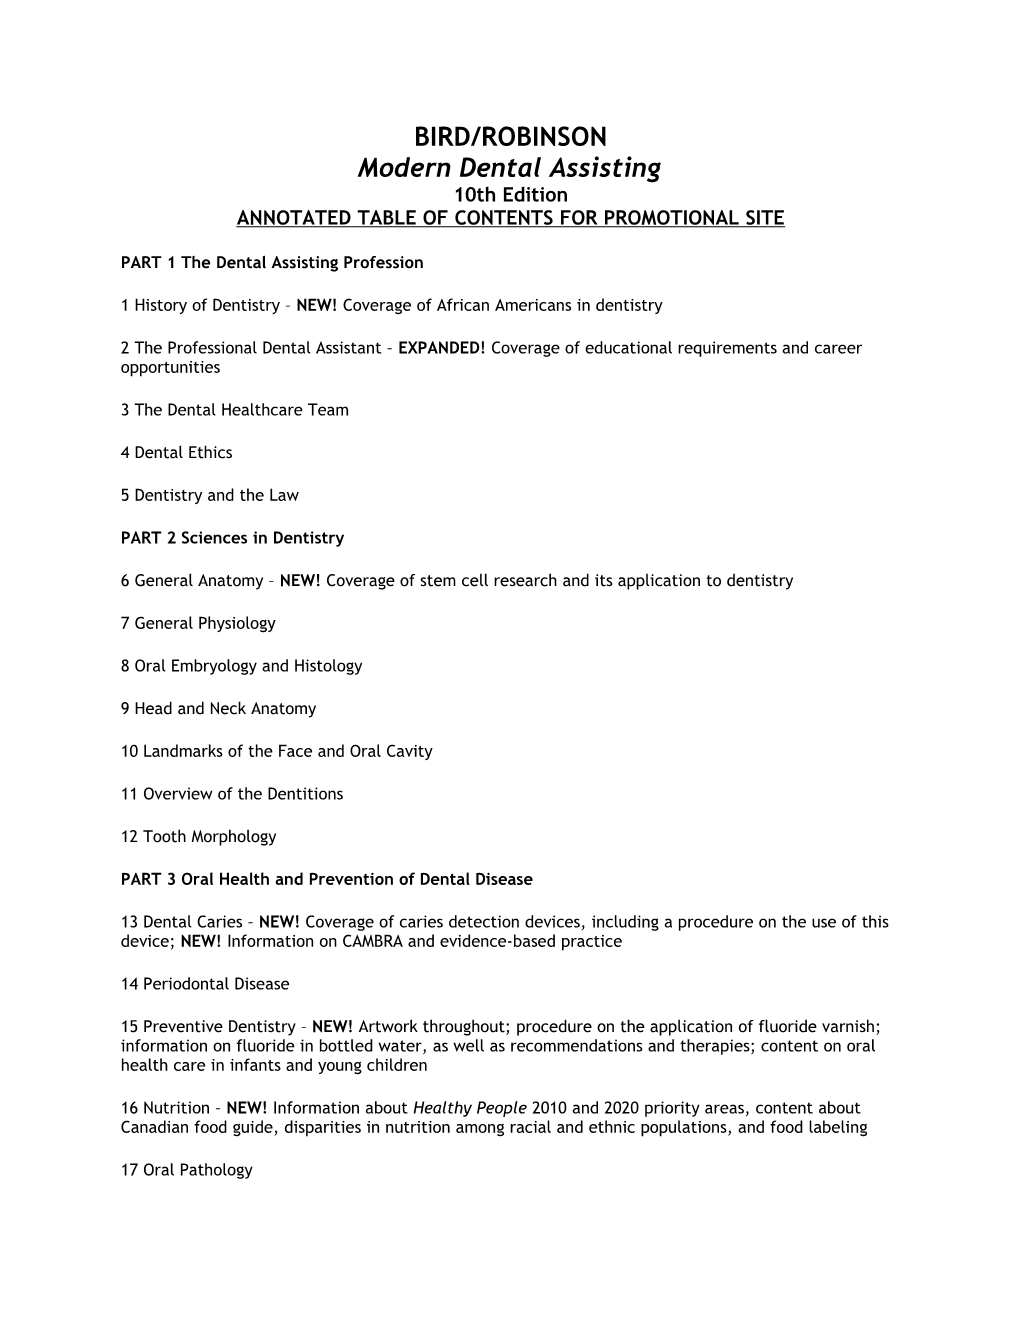 PART 1 the Dental Assisting Profession